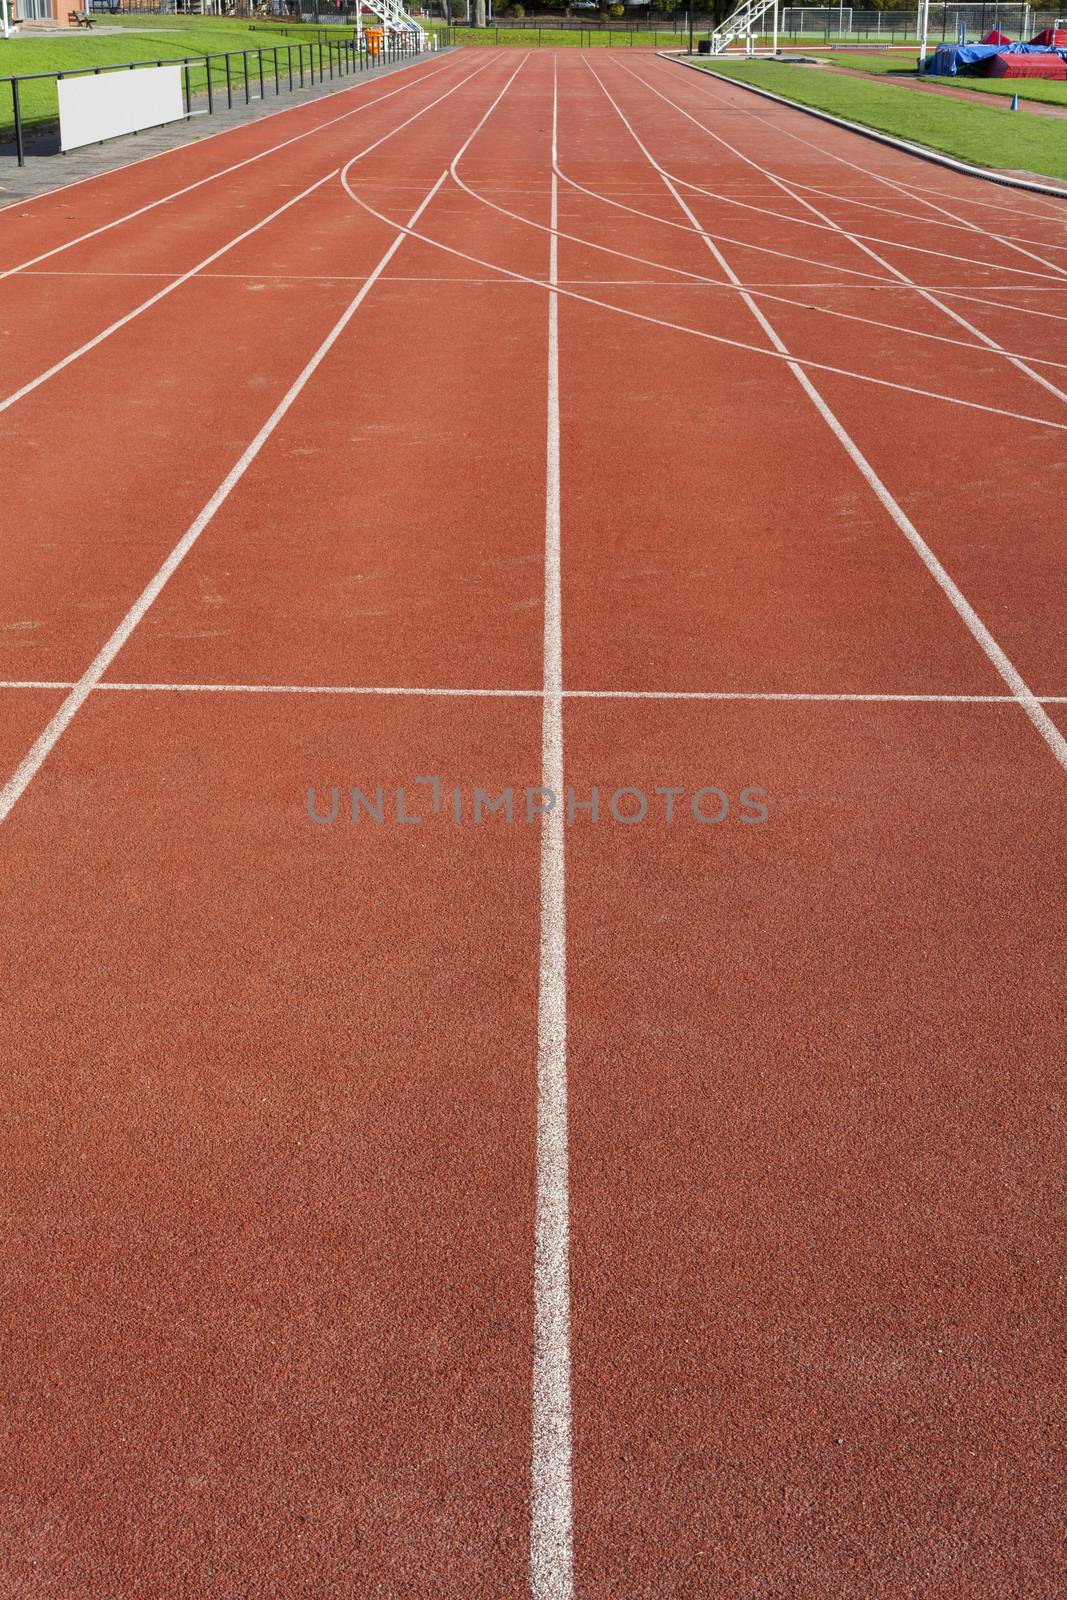 Olympic running track for athletic competition. Race for training sport